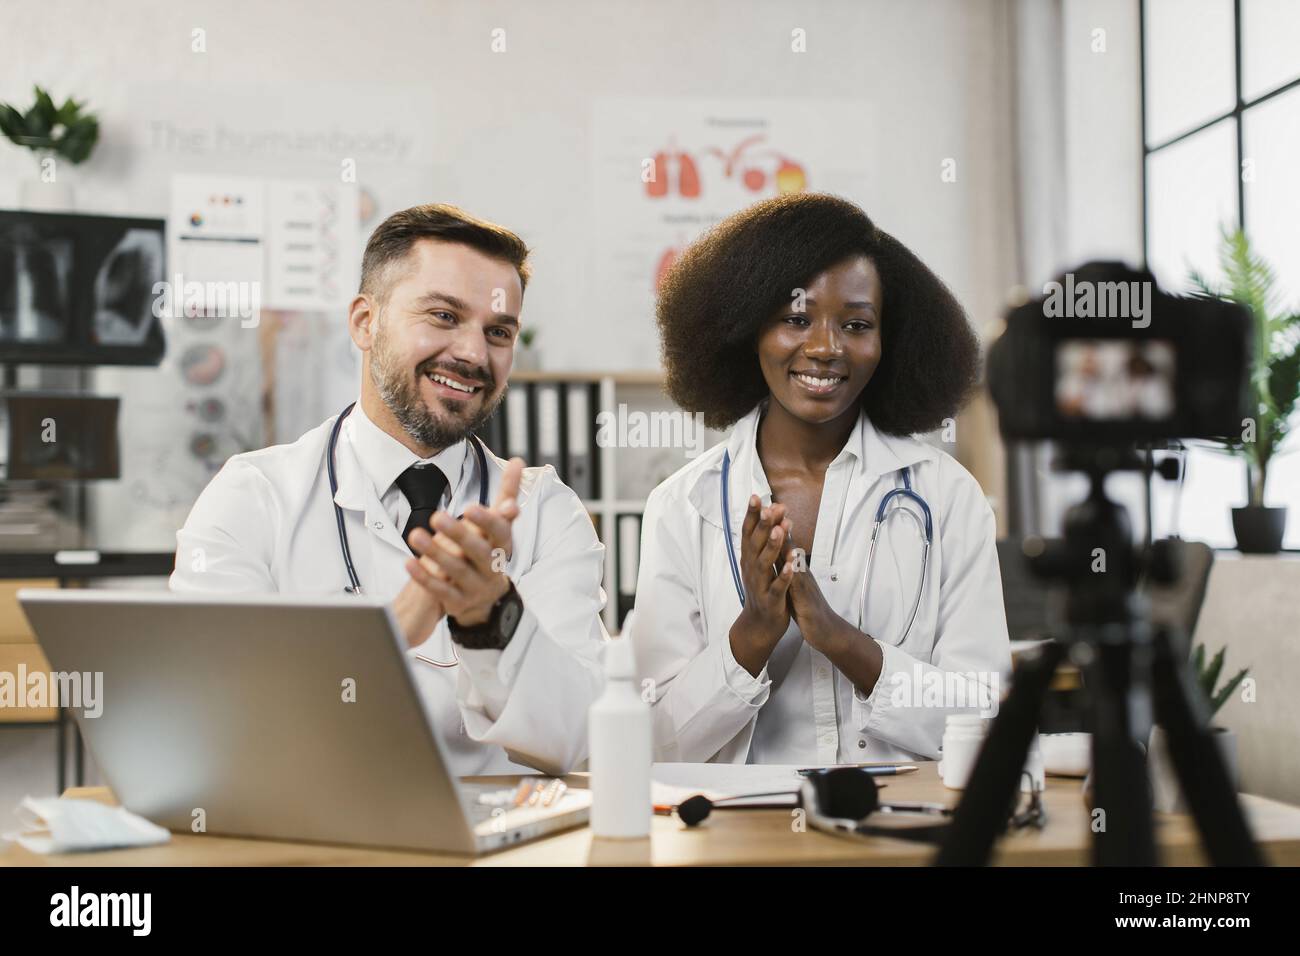 Caucasian male doctor and his african female nurse smiling and clapping in hands while recording broadcast at hospital office. Concept of people, telemedicine and technology. Stock Photo